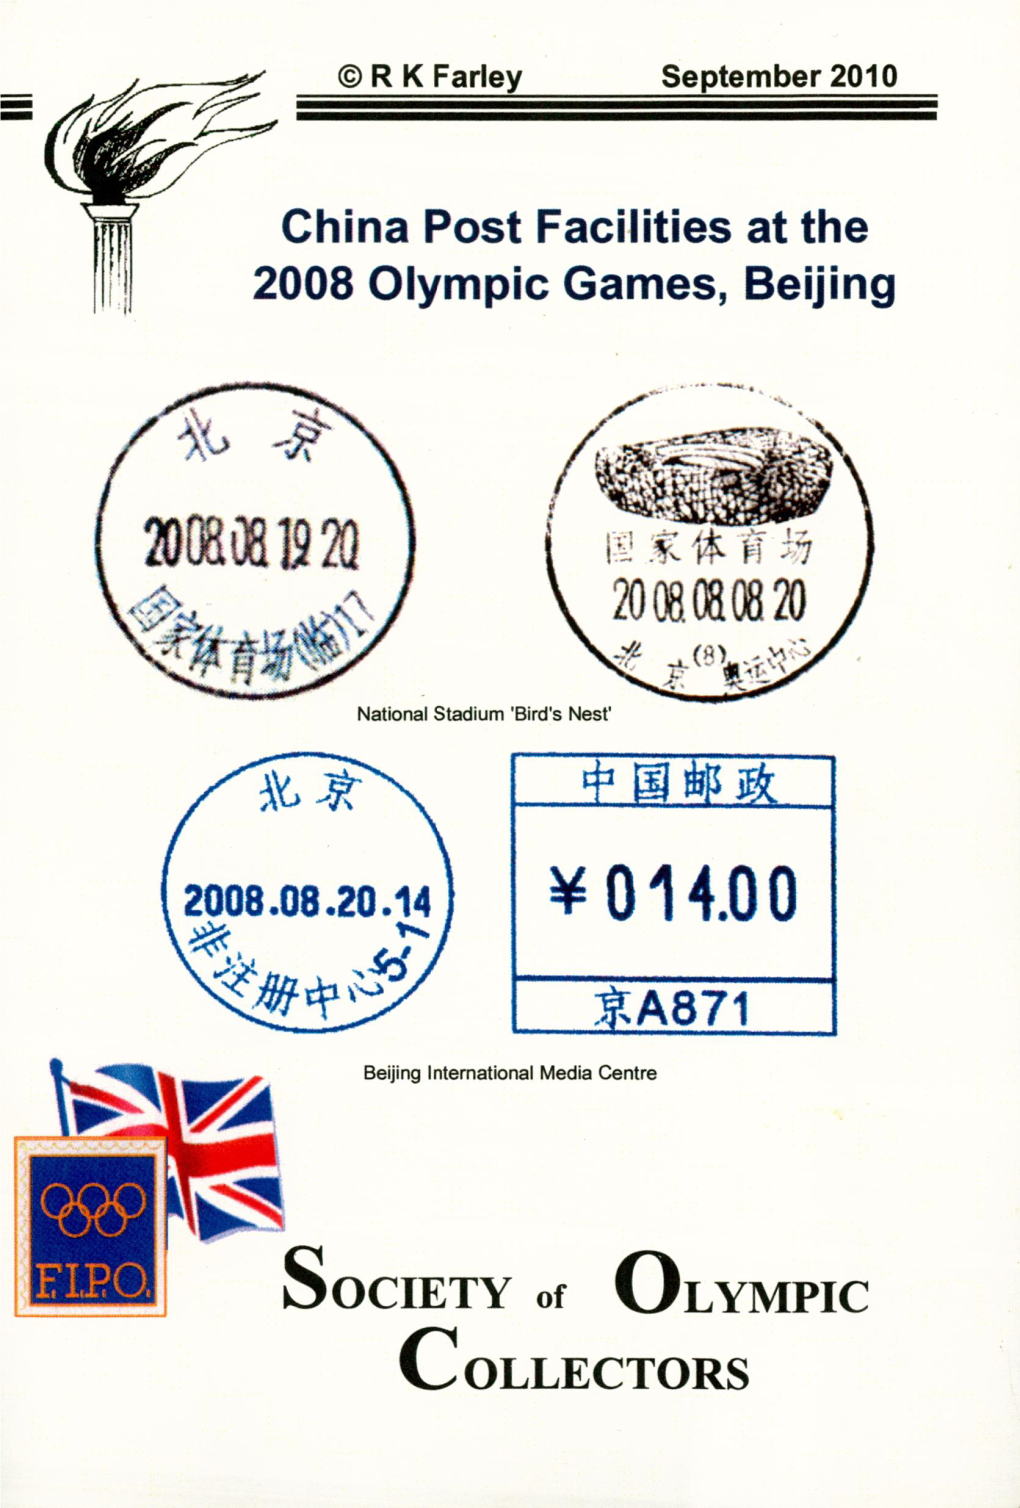 China Post Facilities at the 2008 Olympic Games, Beijing